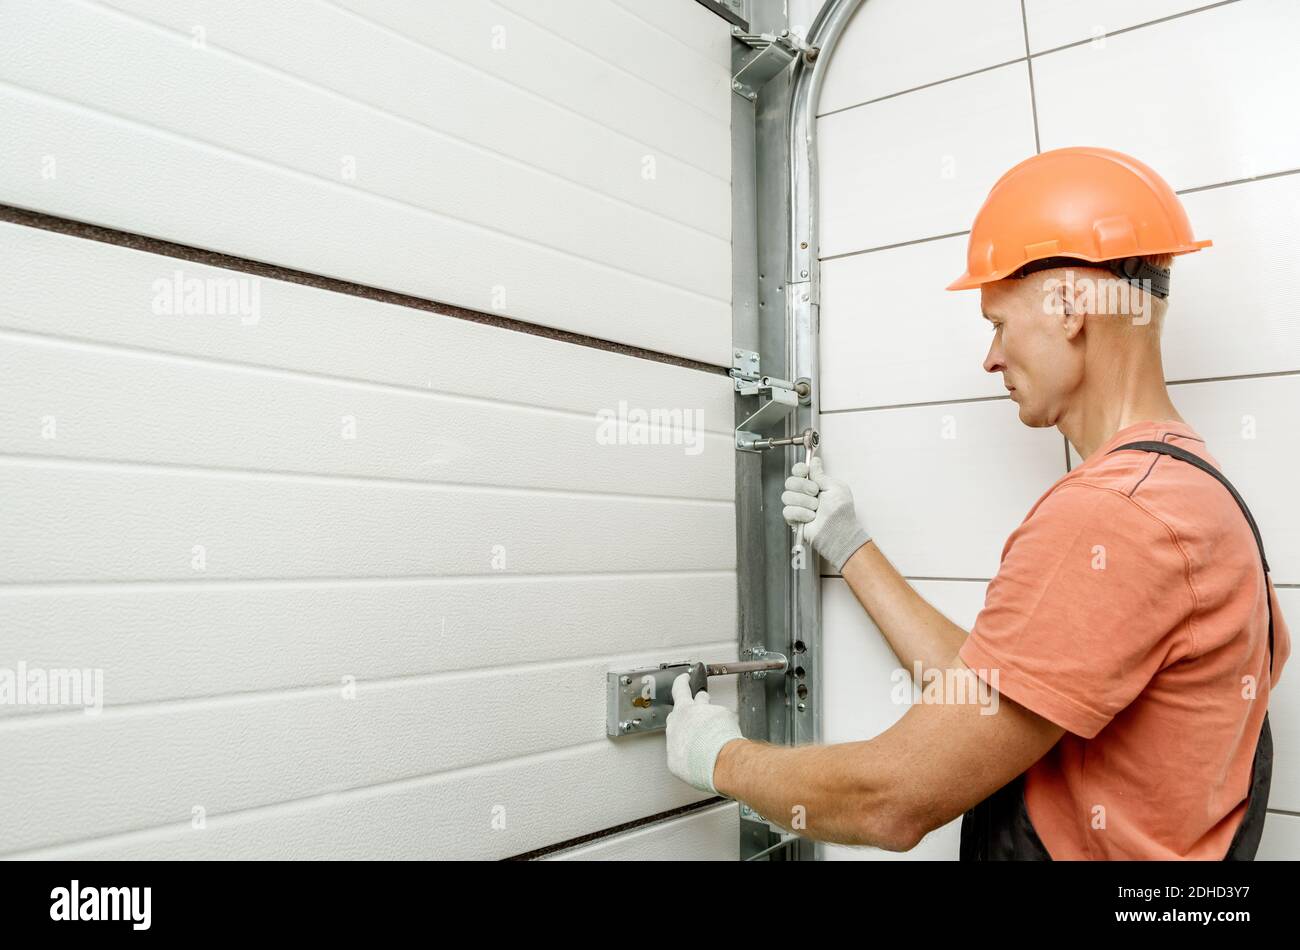 The worker is installing lift gates in the garage. Stock Photo